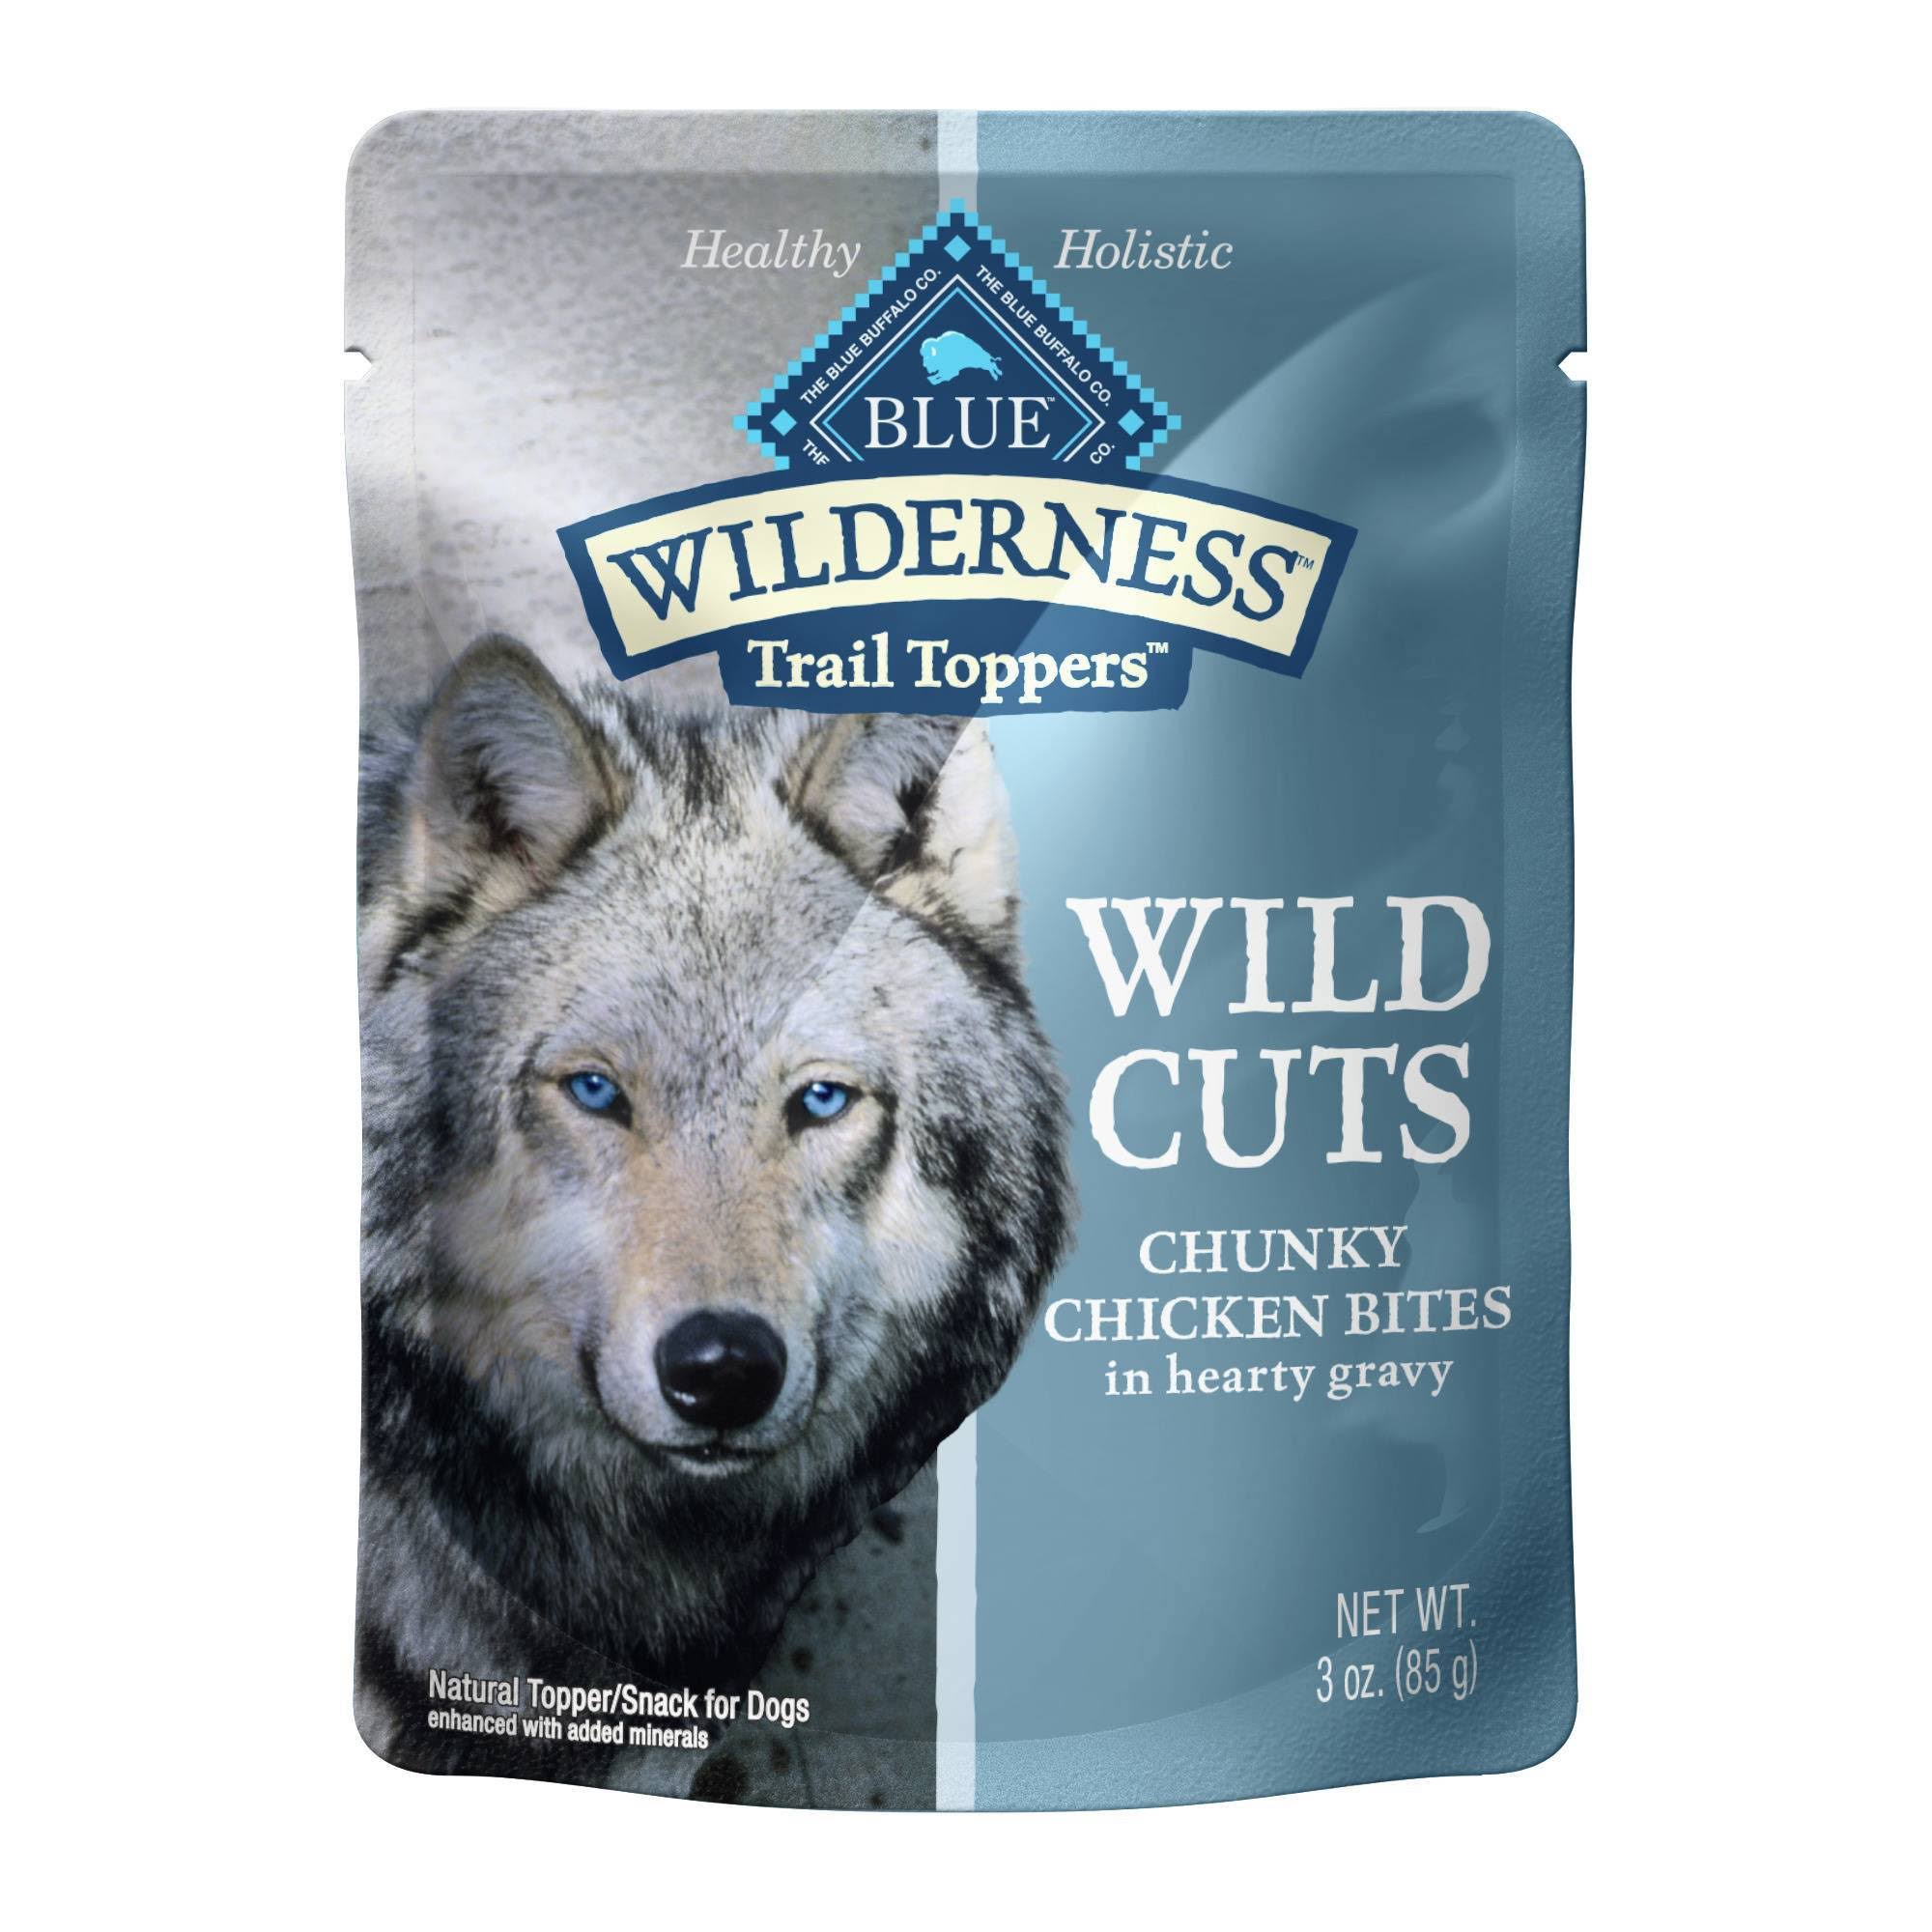 Blue Buffalo Wilderness Wild Cuts Trail Toppers Chunky Dog Treats - Chunky Chicken Bites In Hearty Gravy, 3oz